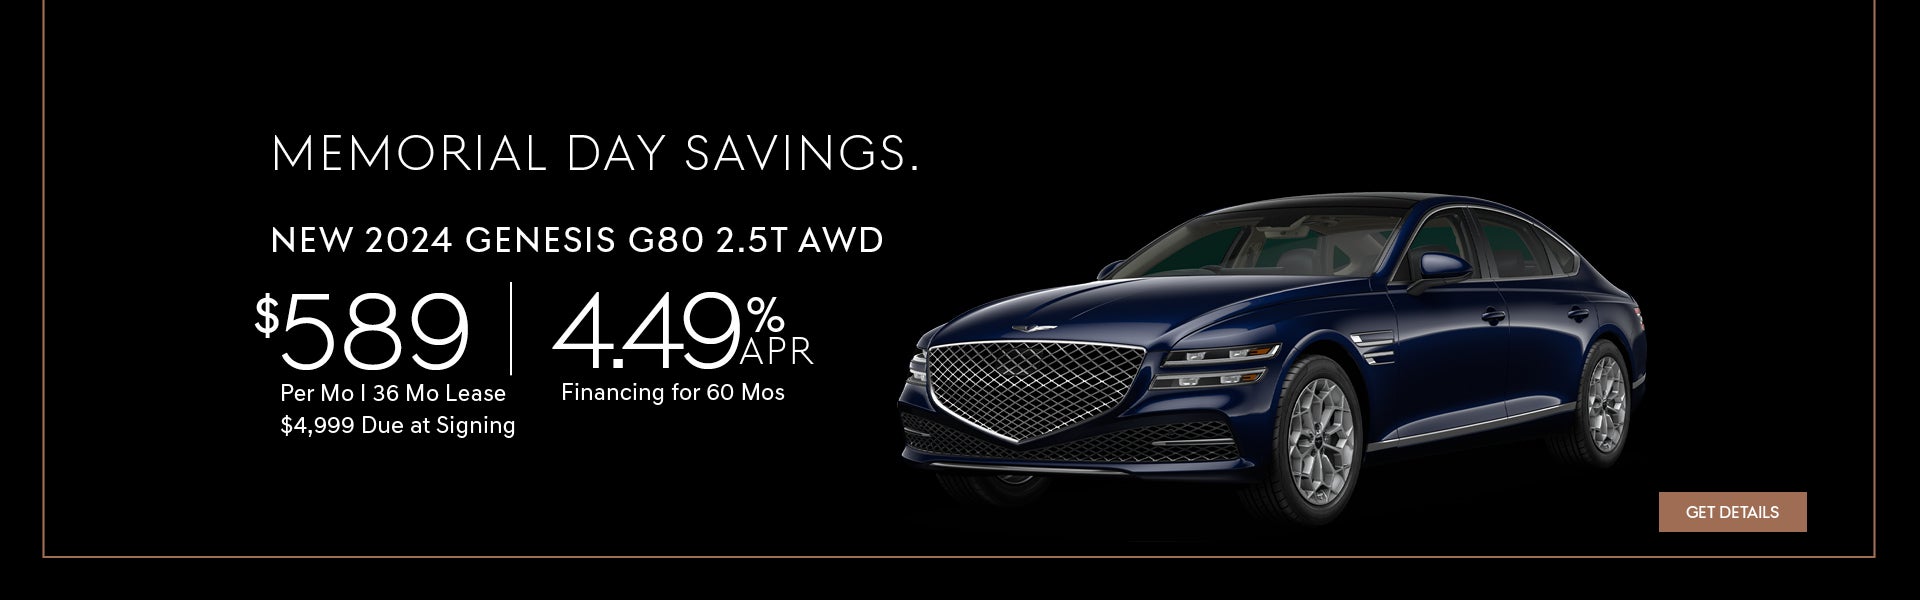 GENESIS G80 2.5T AWD Lease Special